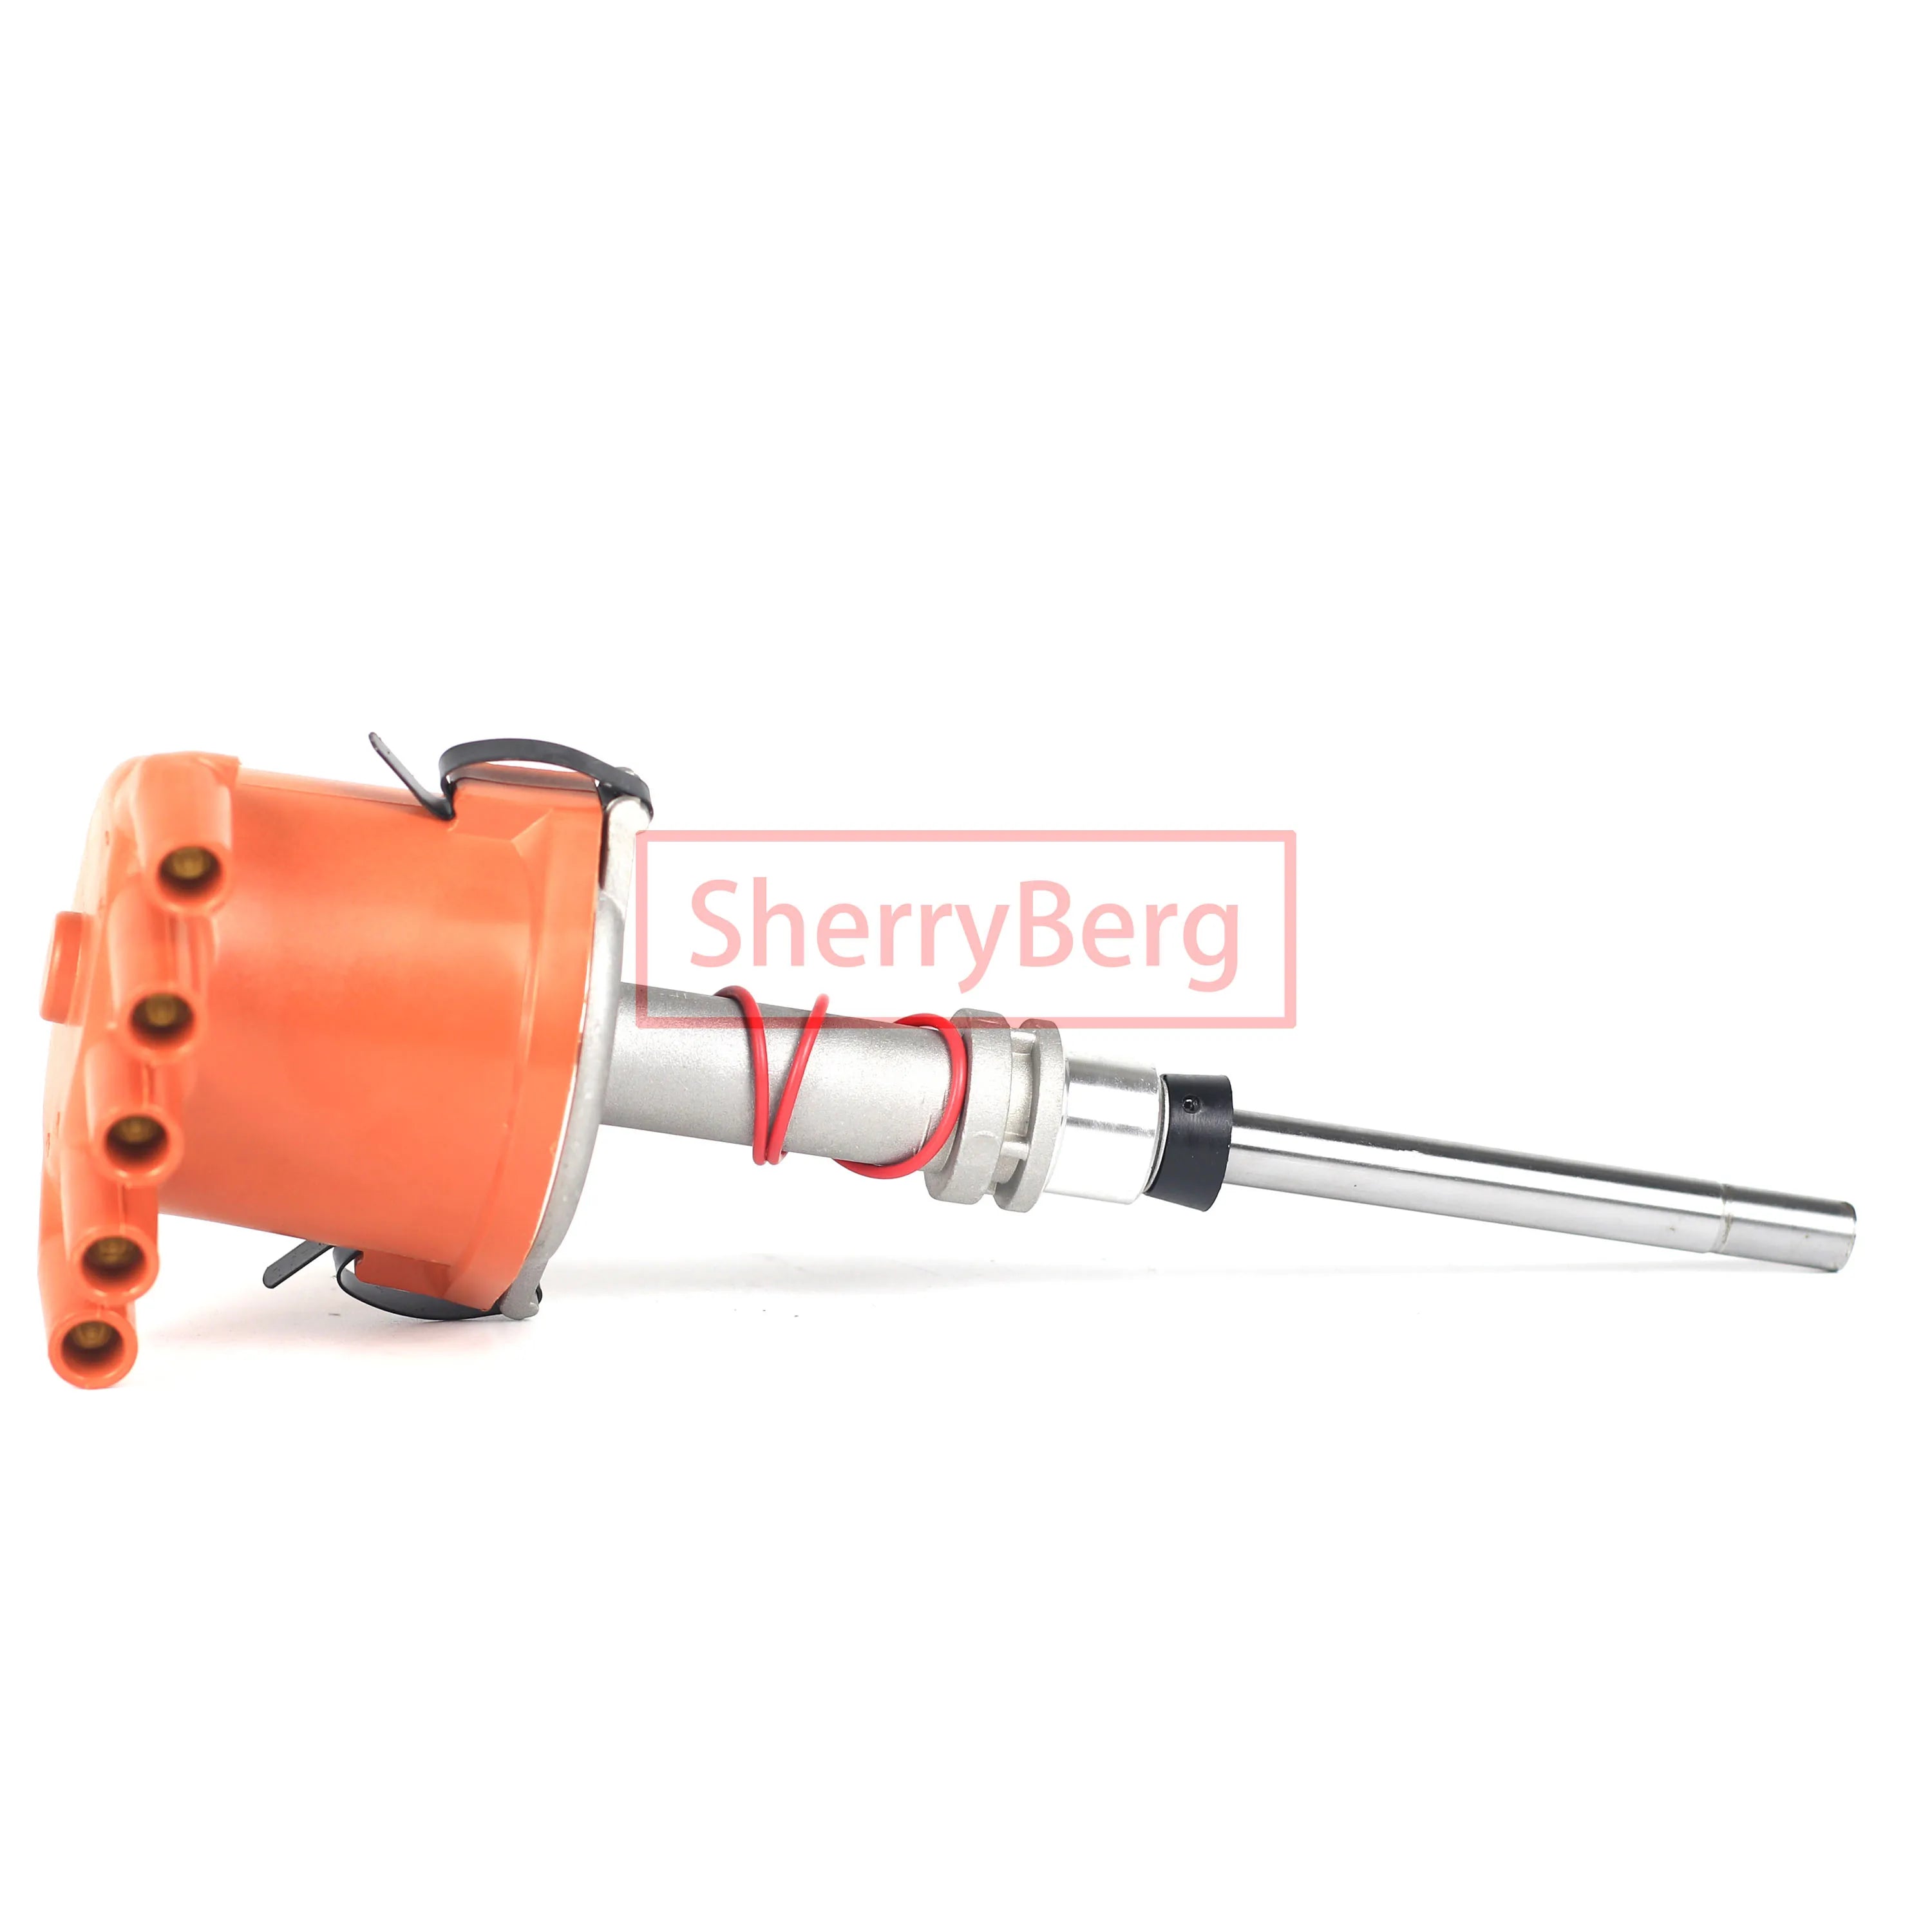 SherryBerg  Electrical Ignition Kit / Distributor for Fiat 127  903cc, Special 903cc  1975-1977  127  900 C, L, CL   1977-1983